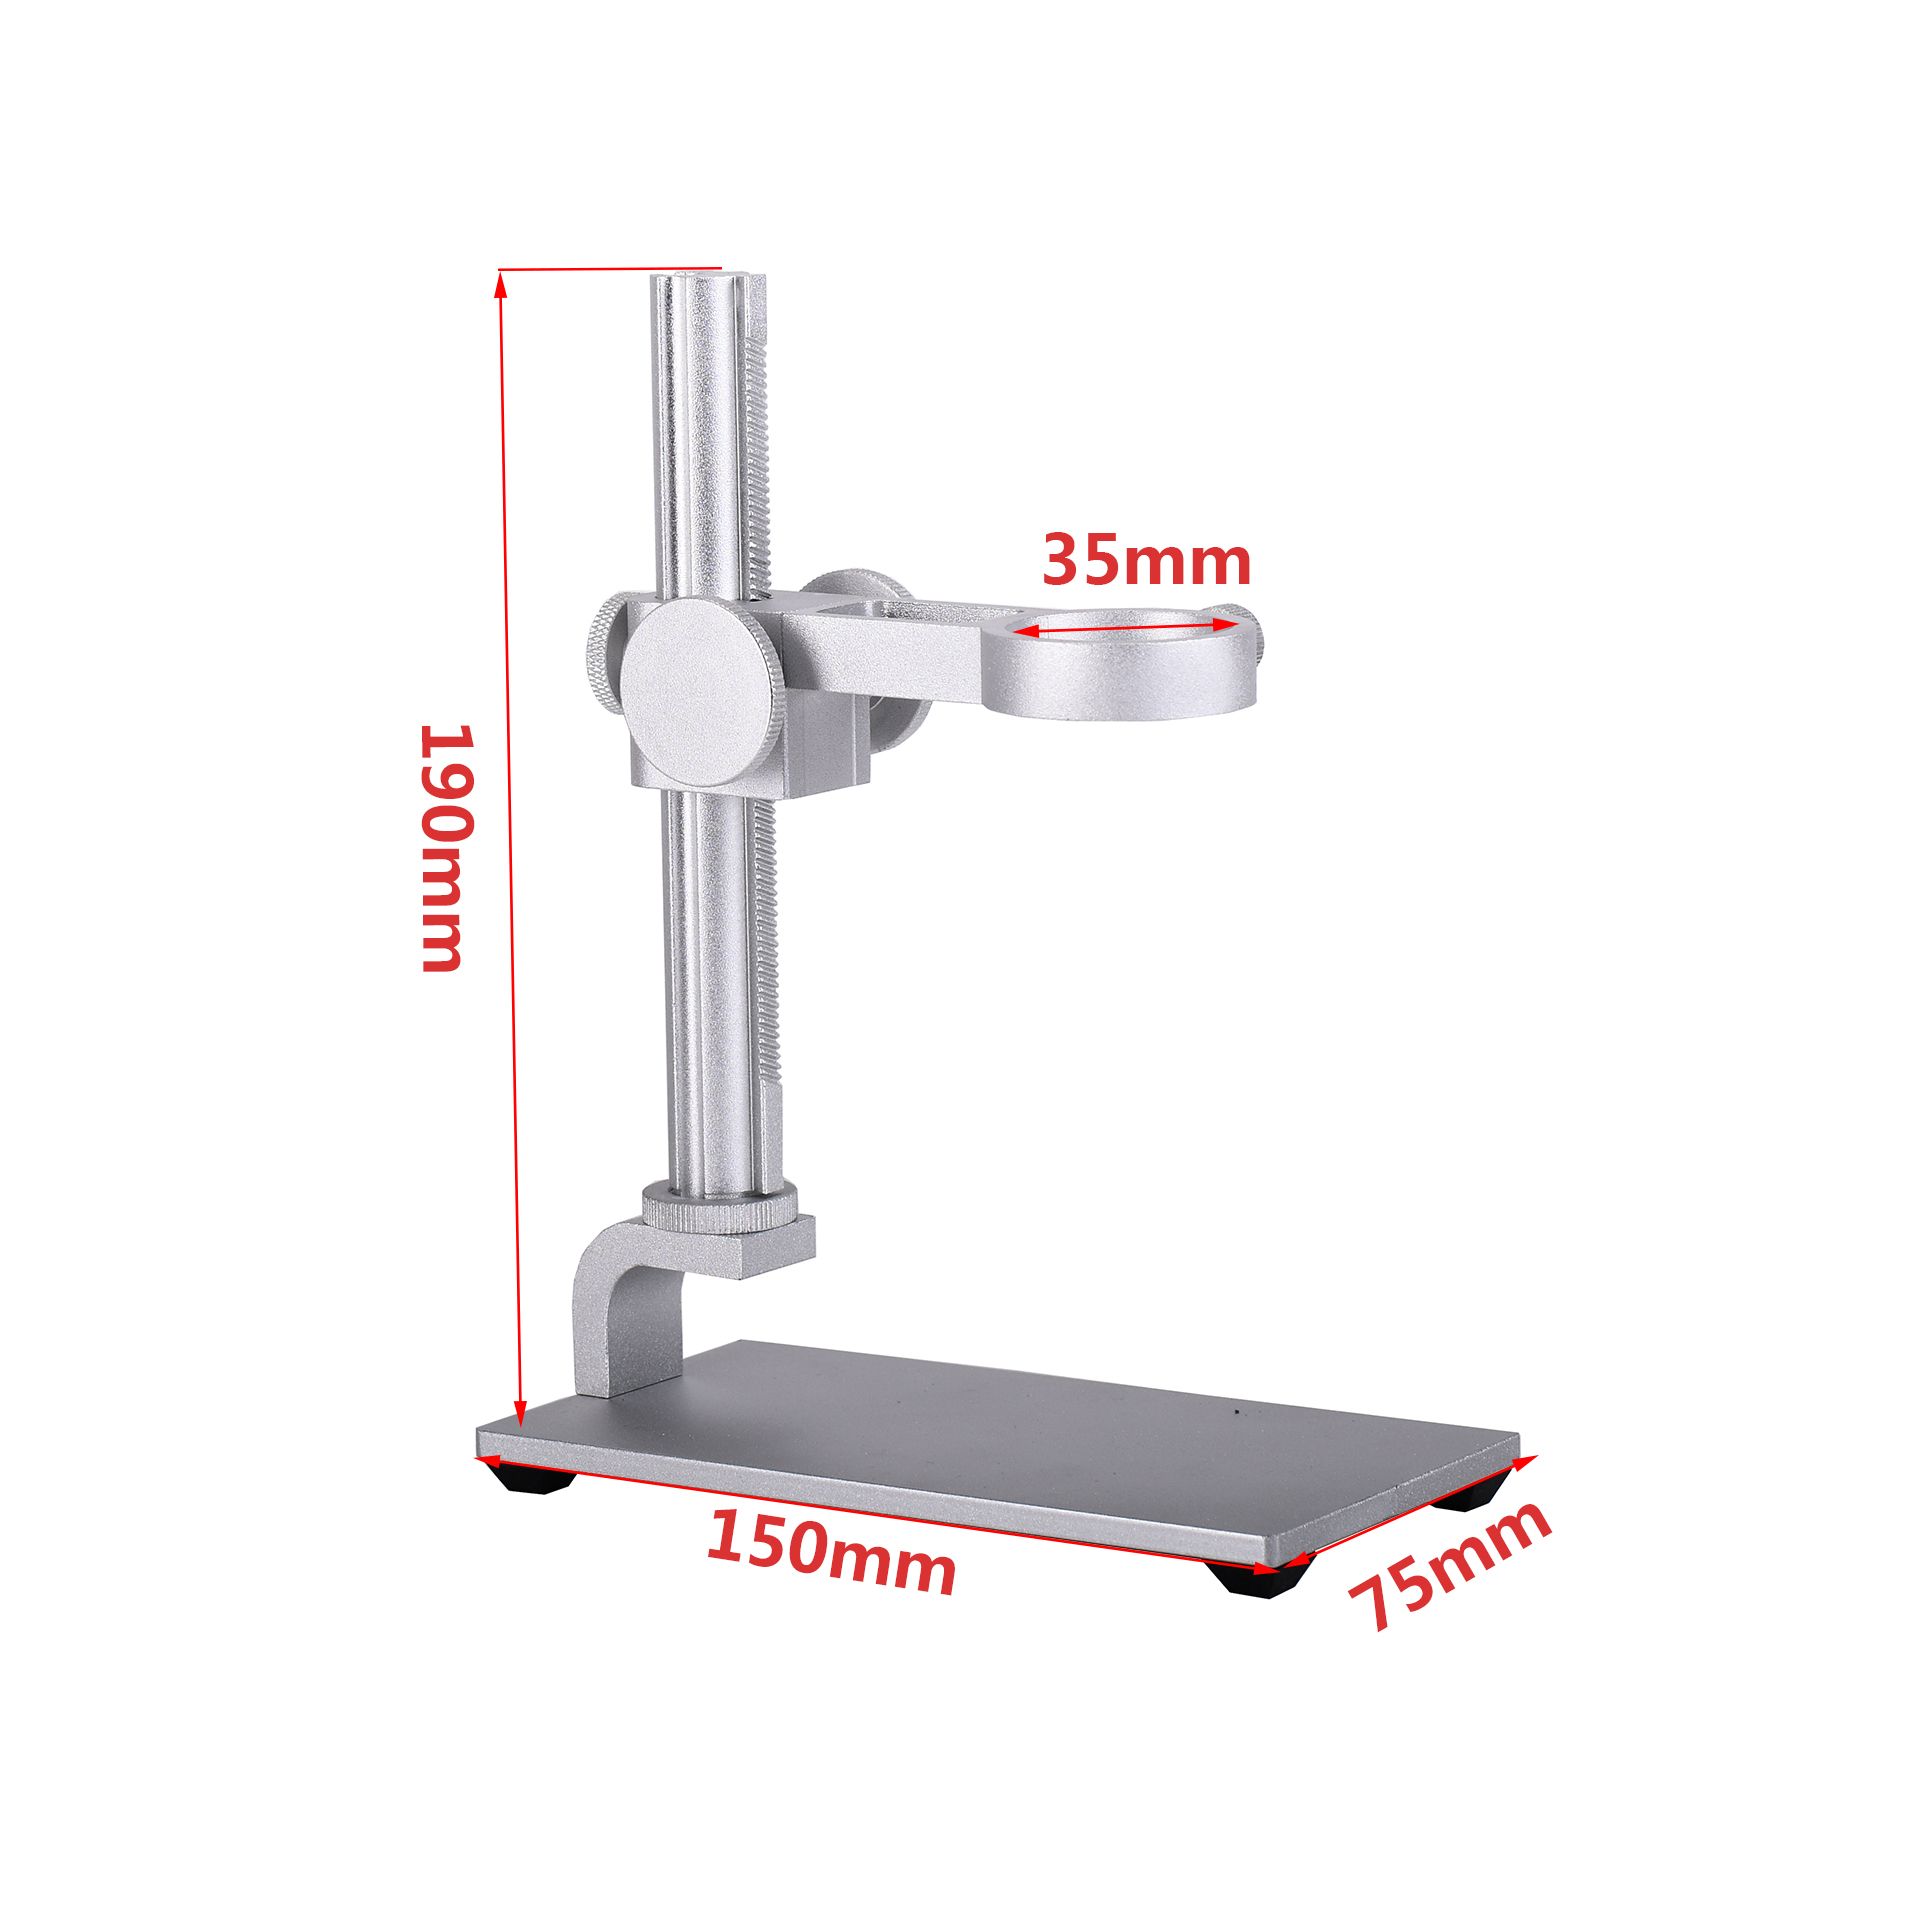 HAYEAR-Full-HD-24MP-1080P-60FPS-Industry-Video-Microscope-Camera-HDMI-USB--Output-Magnifier-TF-Stora-1705005